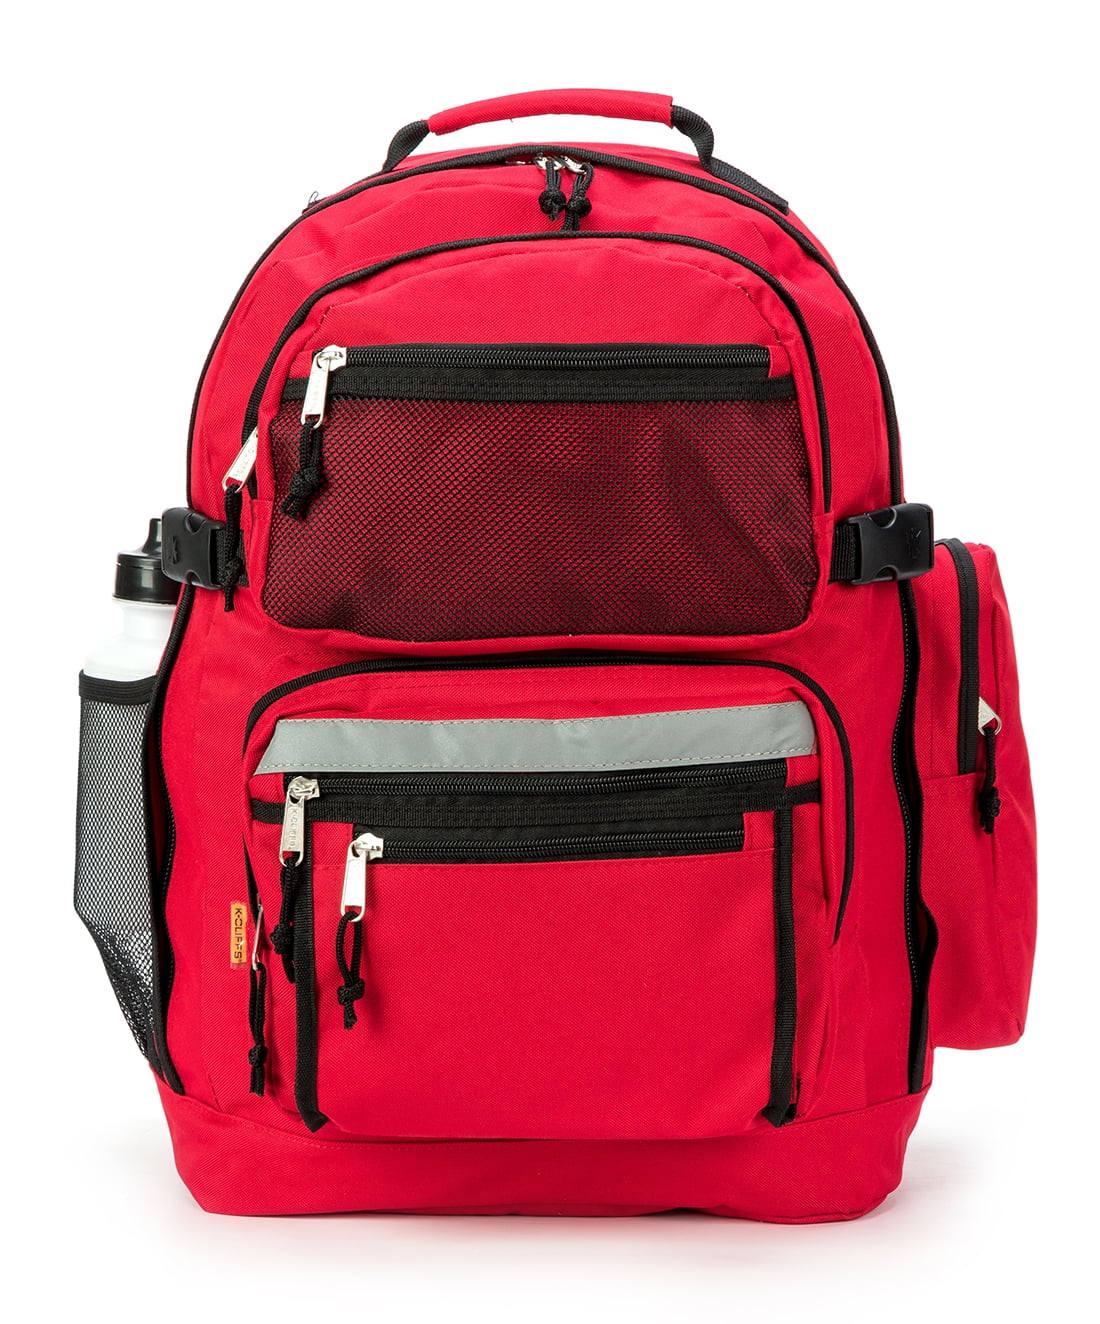 Large Backpack School Bag Book Bag with Free water bottle 19 Inches Red 19 x 13 x 8 - www.bagsaleusa.com